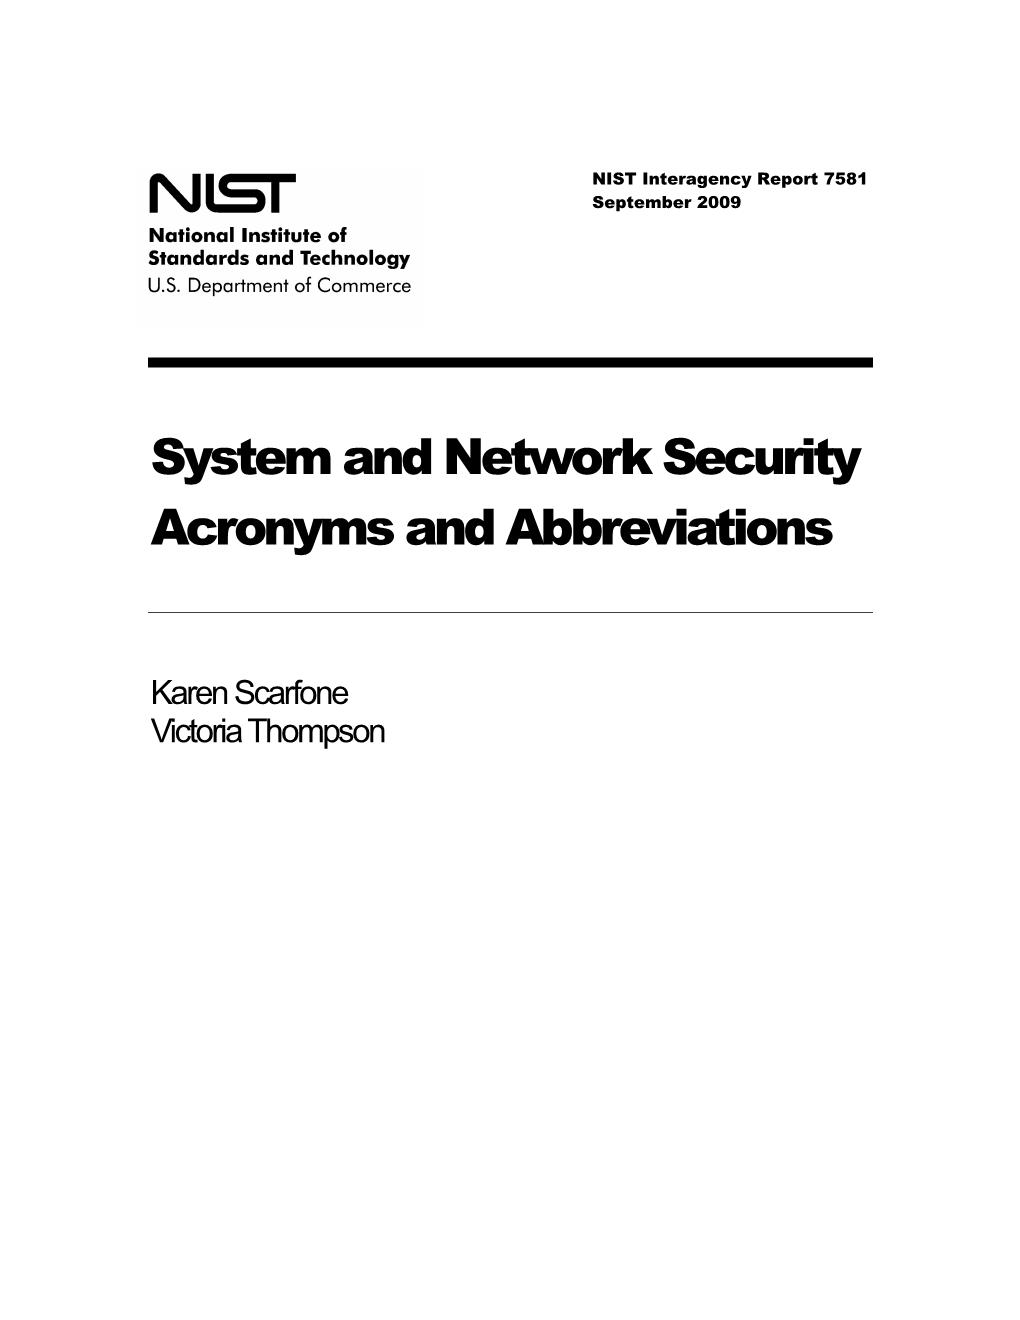 System and Network Security Acronyms and Abbreviations